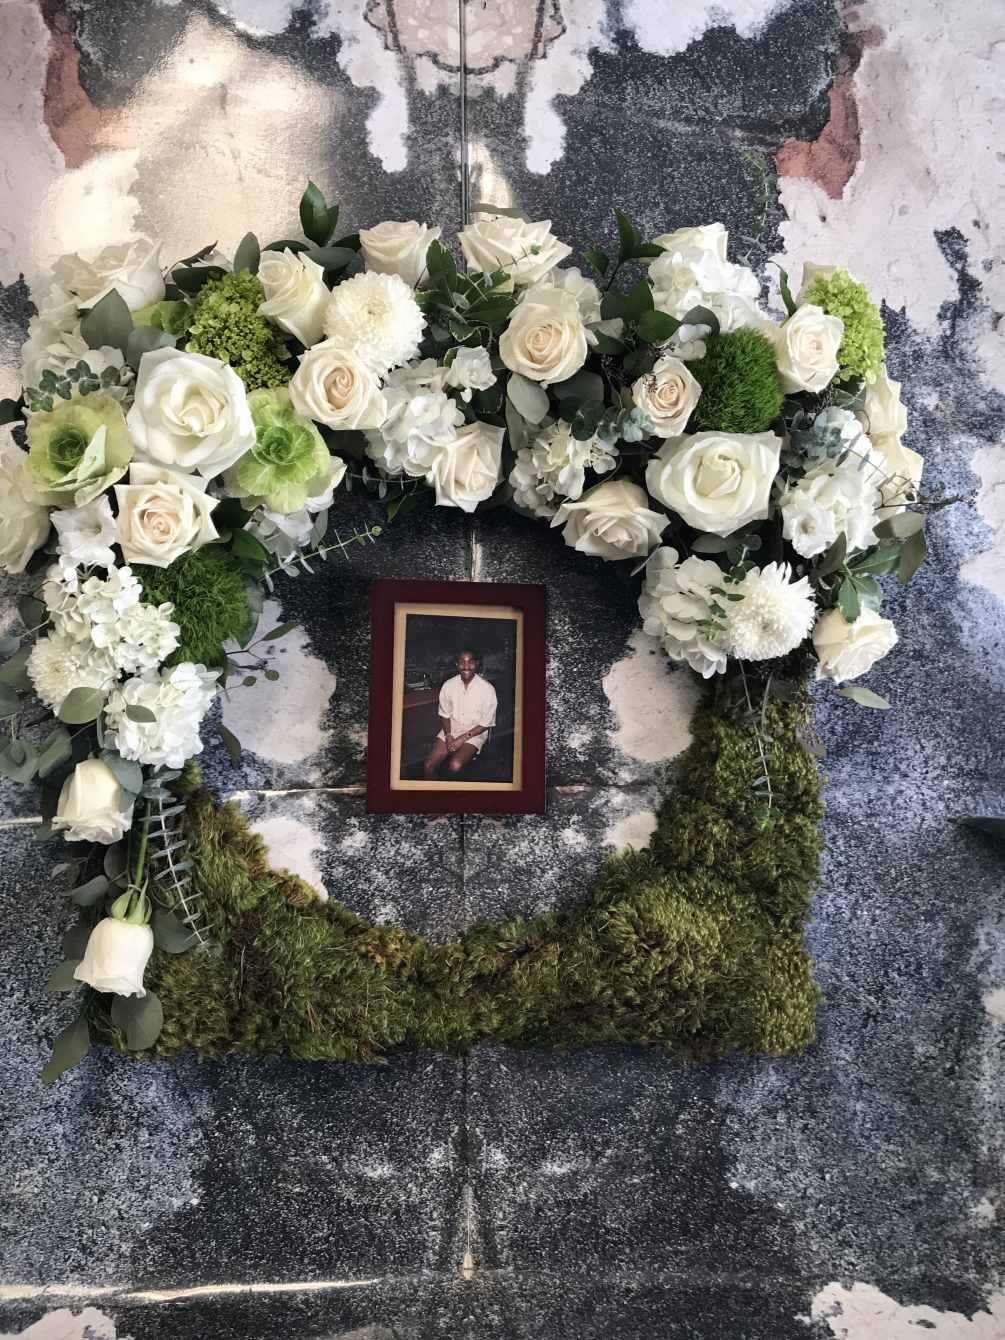 This wreath is designed with White Roses, White and Green Hydranges, White